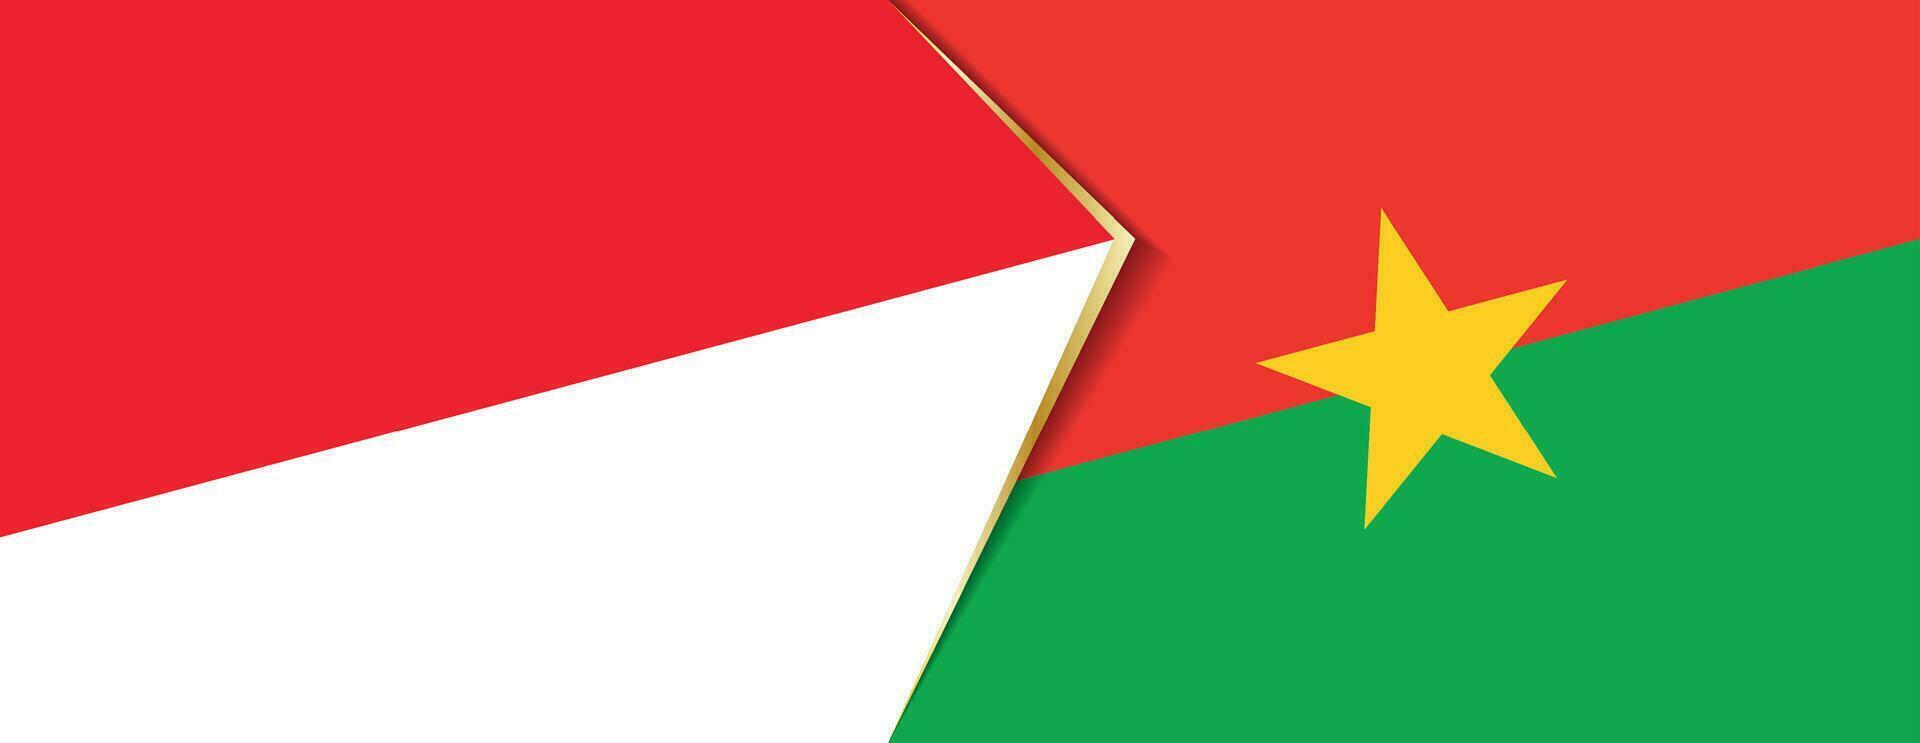 Indonesia and Burkina Faso flags, two vector flags.